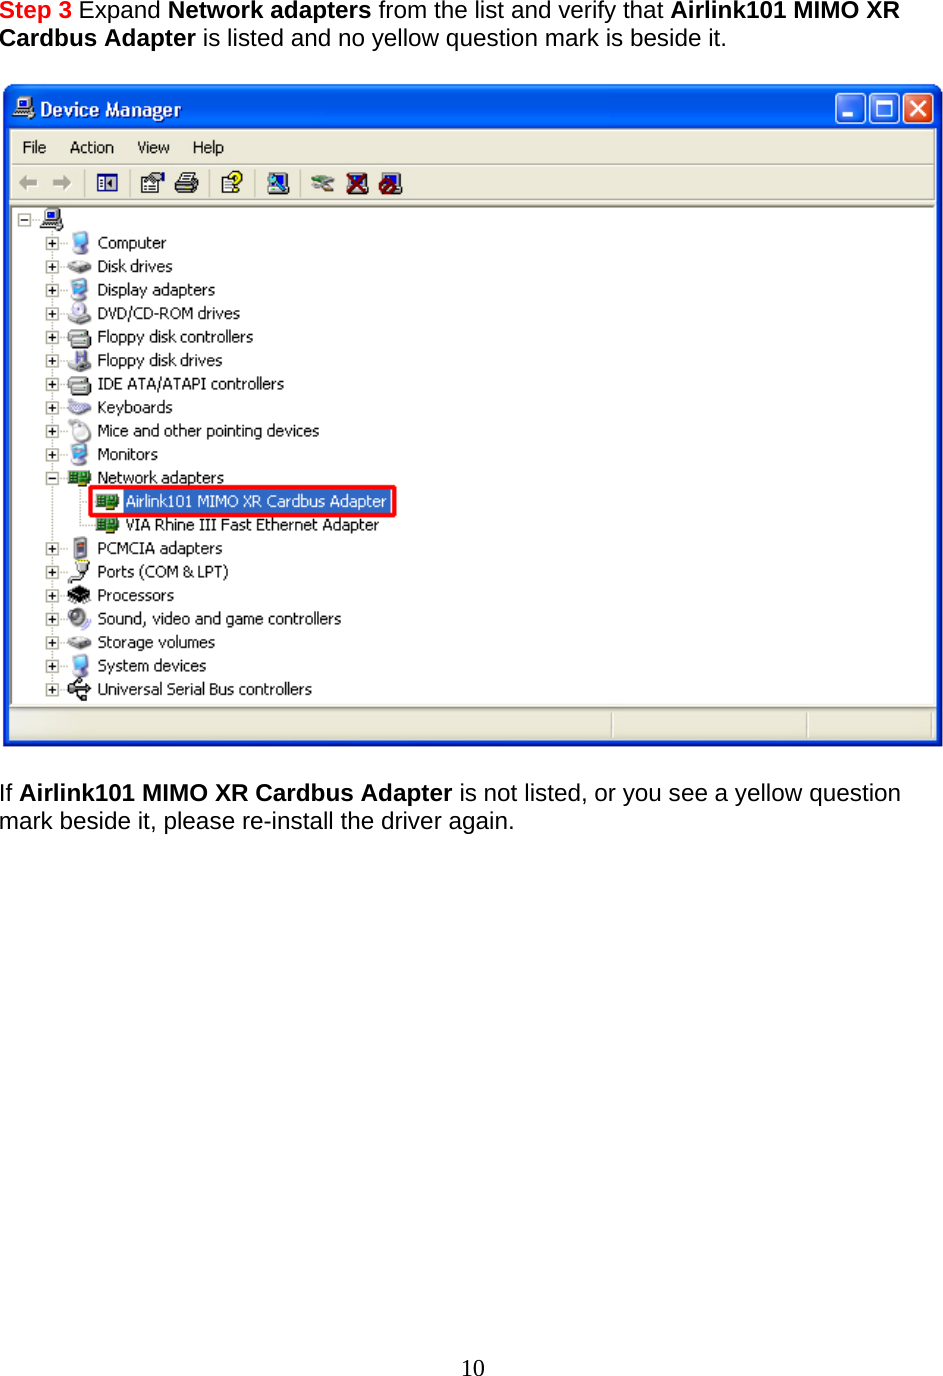 10 Step 3 Expand Network adapters from the list and verify that Airlink101 MIMO XR Cardbus Adapter is listed and no yellow question mark is beside it.    If Airlink101 MIMO XR Cardbus Adapter is not listed, or you see a yellow question mark beside it, please re-install the driver again.                 